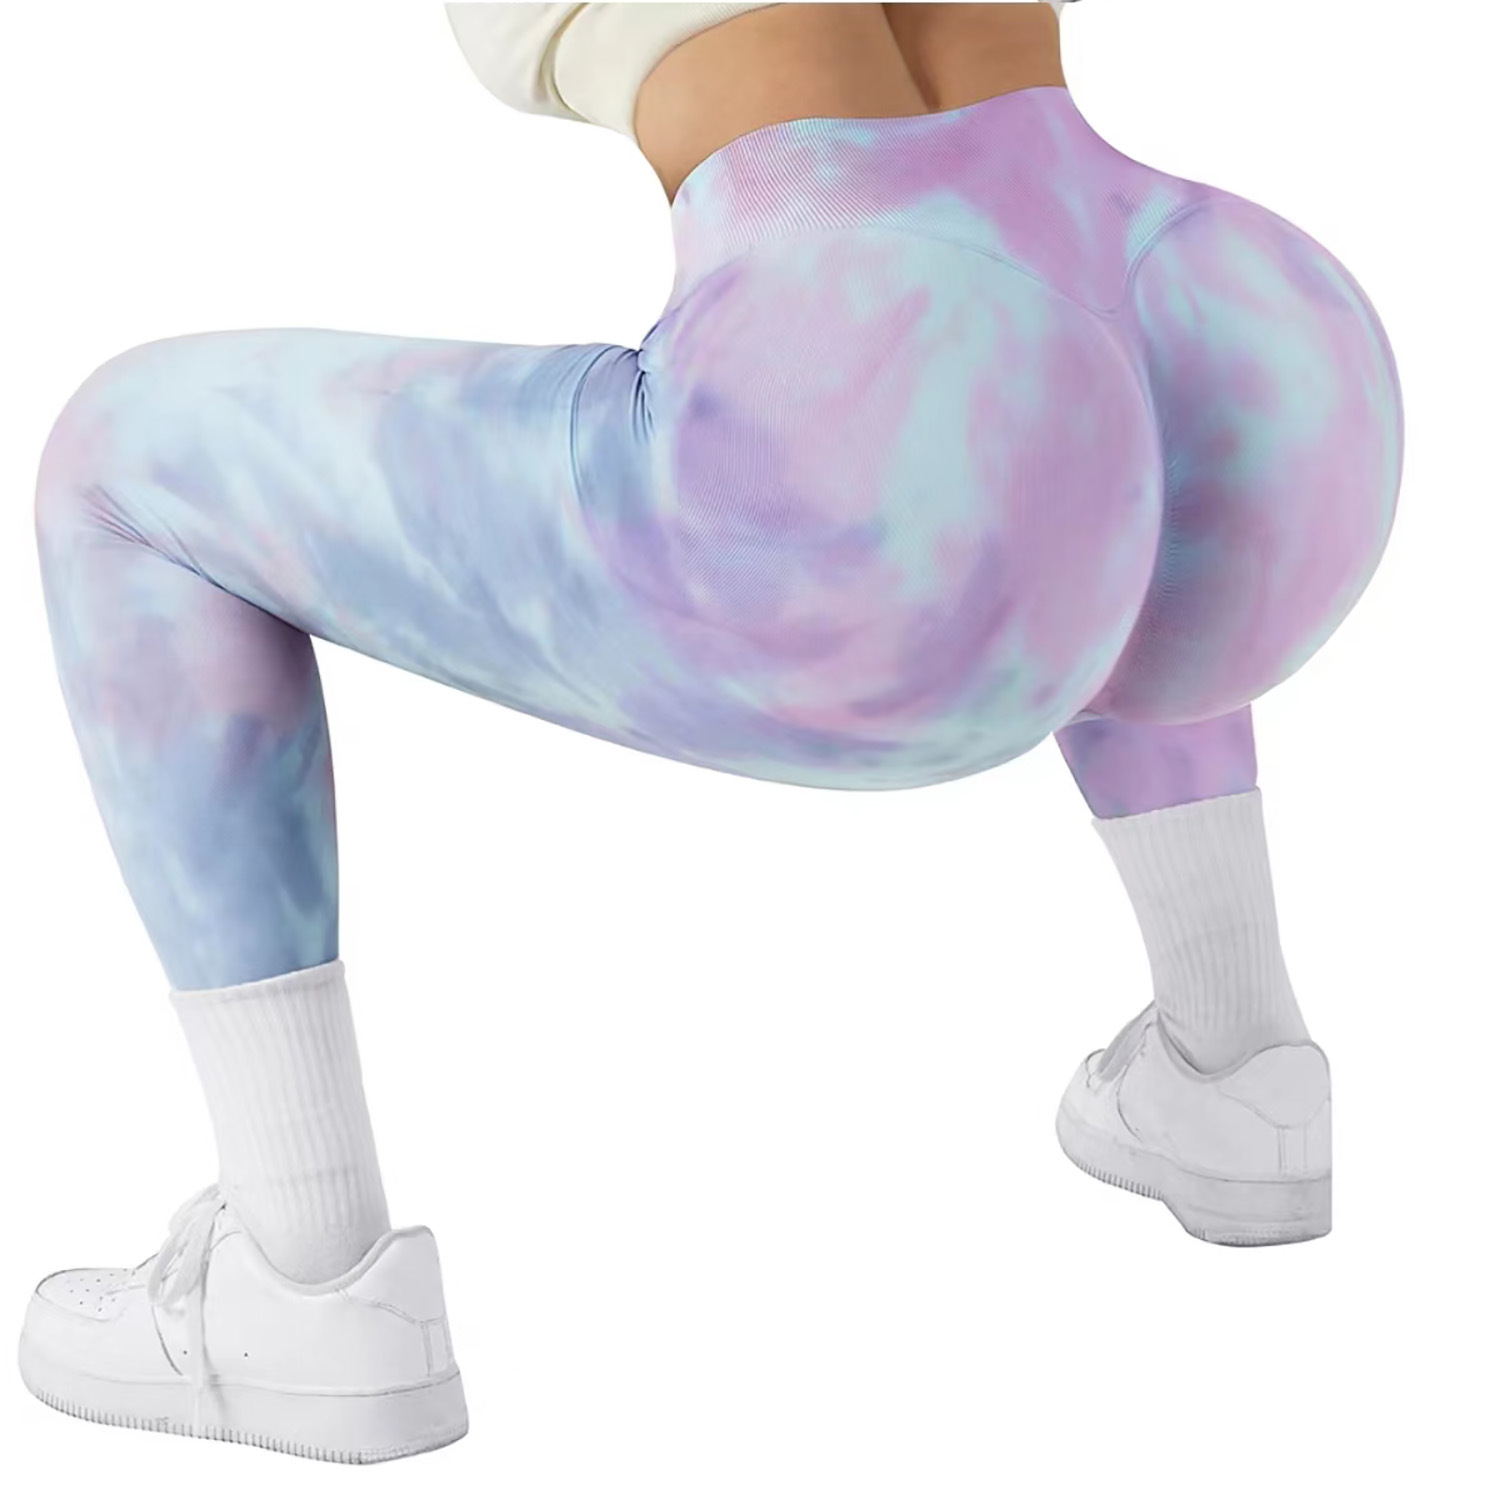 Cross-Border Seamless Binding and Bleaching Peach Hip Yoga Pants High Waist Belly Contracting Fitness Pants Women's Tie-Dyed Running Sports Tight Pants